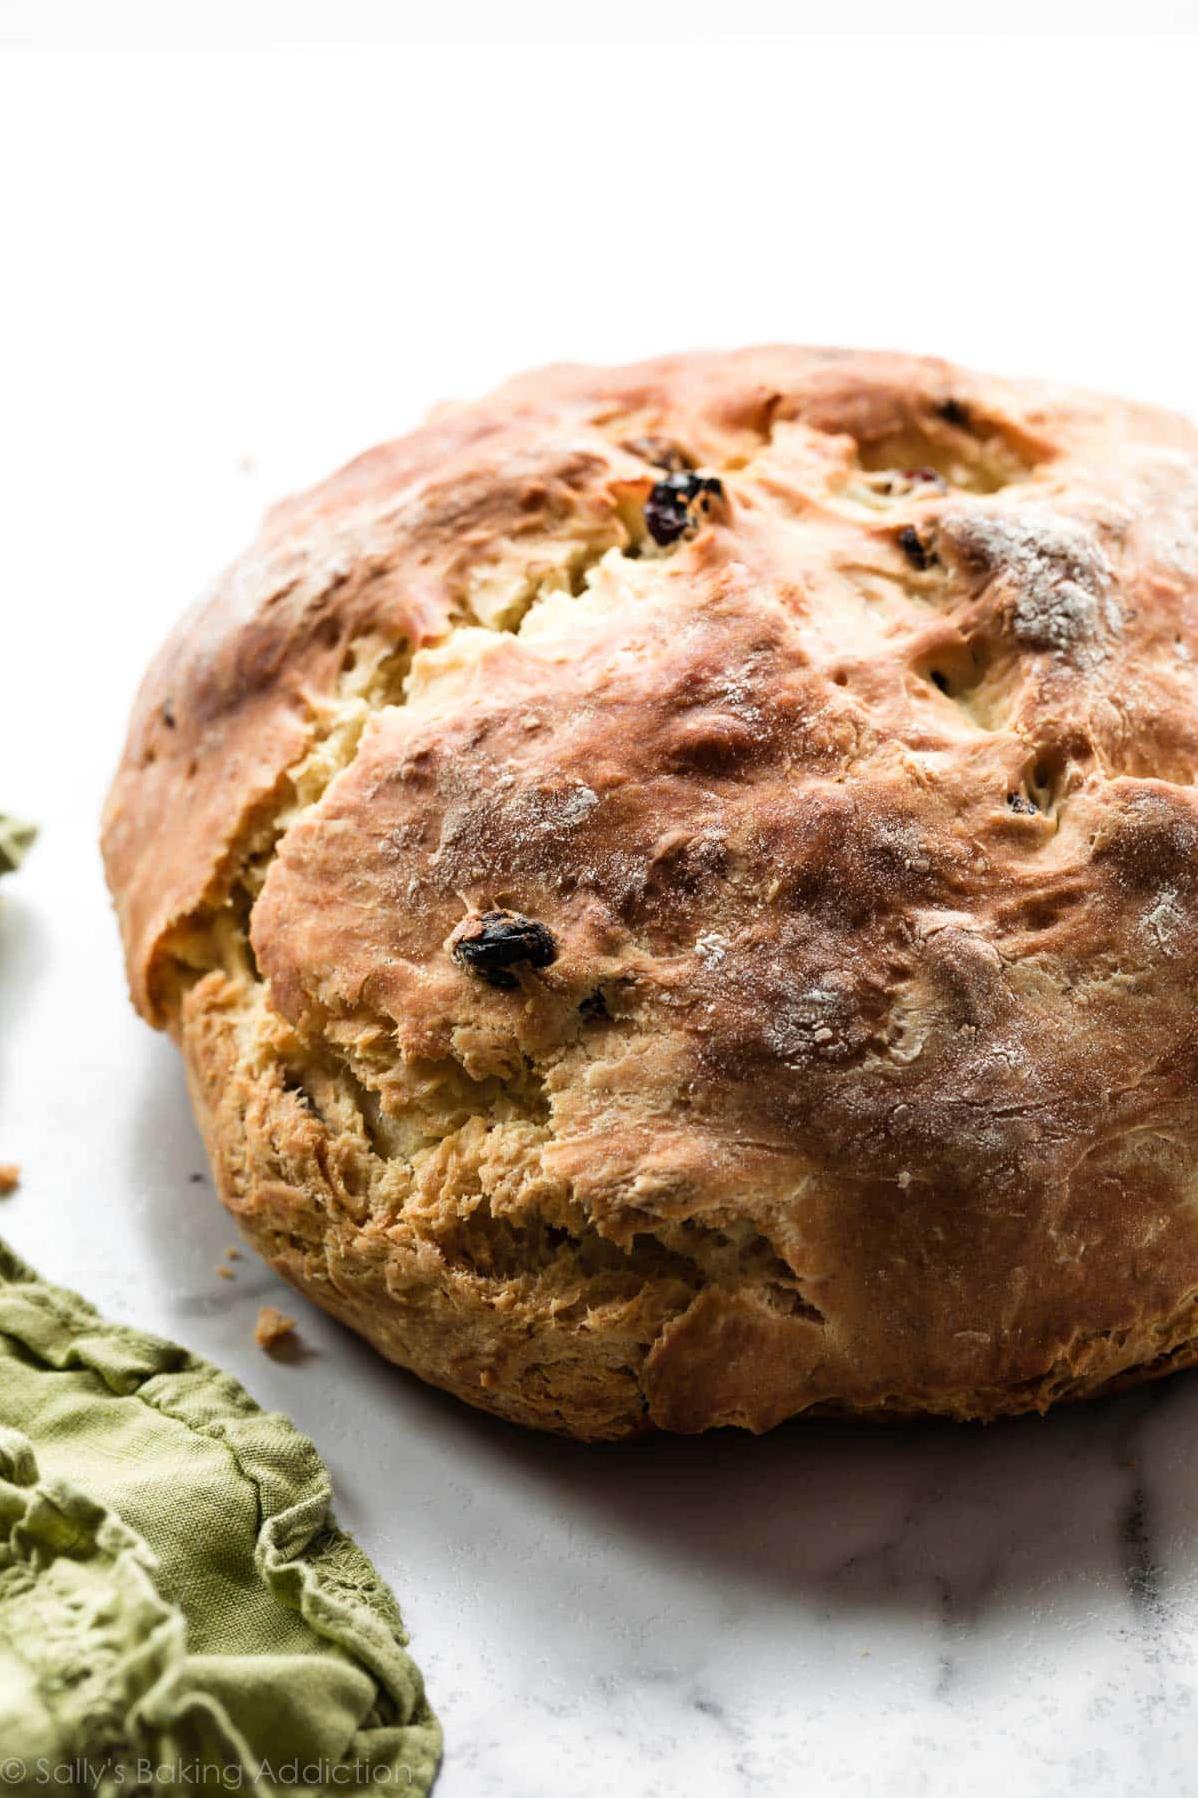  Fresh out of the oven, this Irish soda bread is waiting to be served with a cup of tea or a bowl of soup.